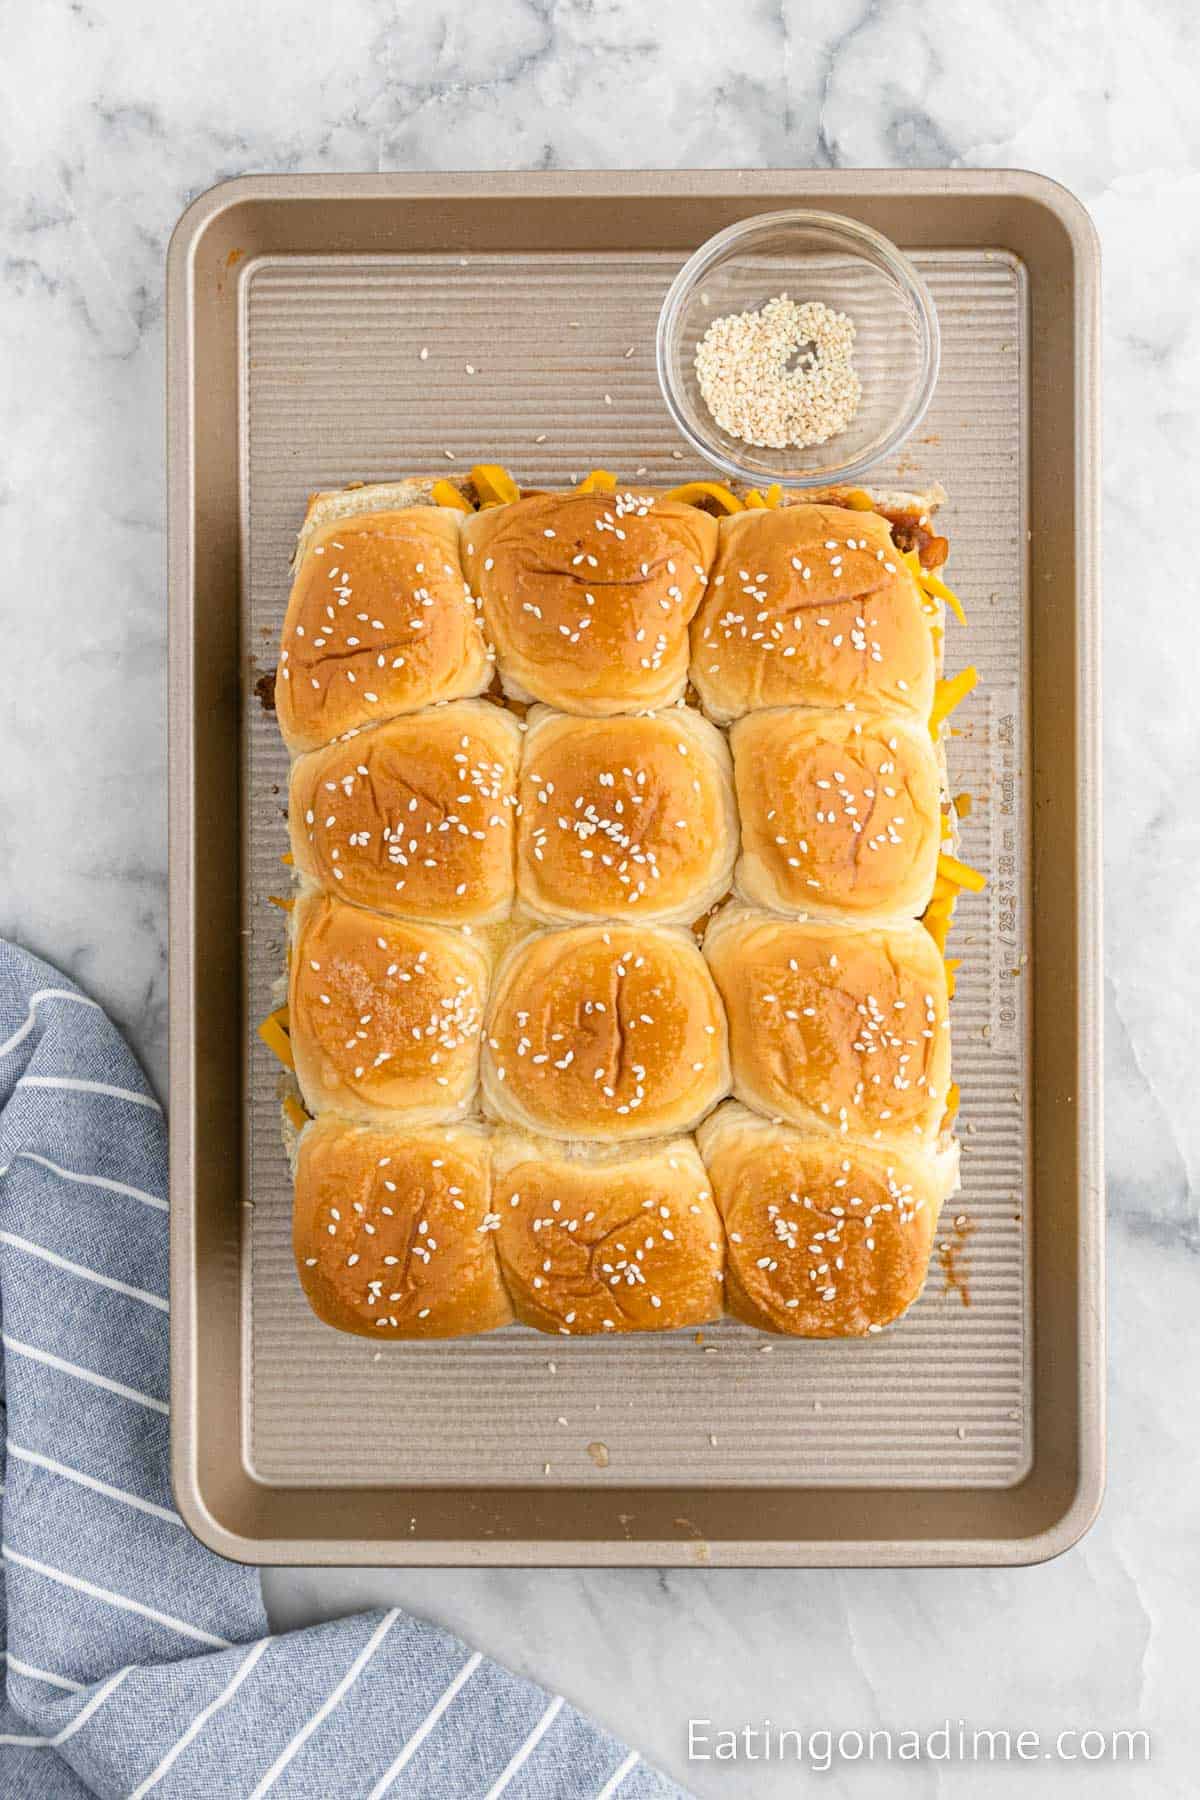 Topping the sliders with sesame seeds